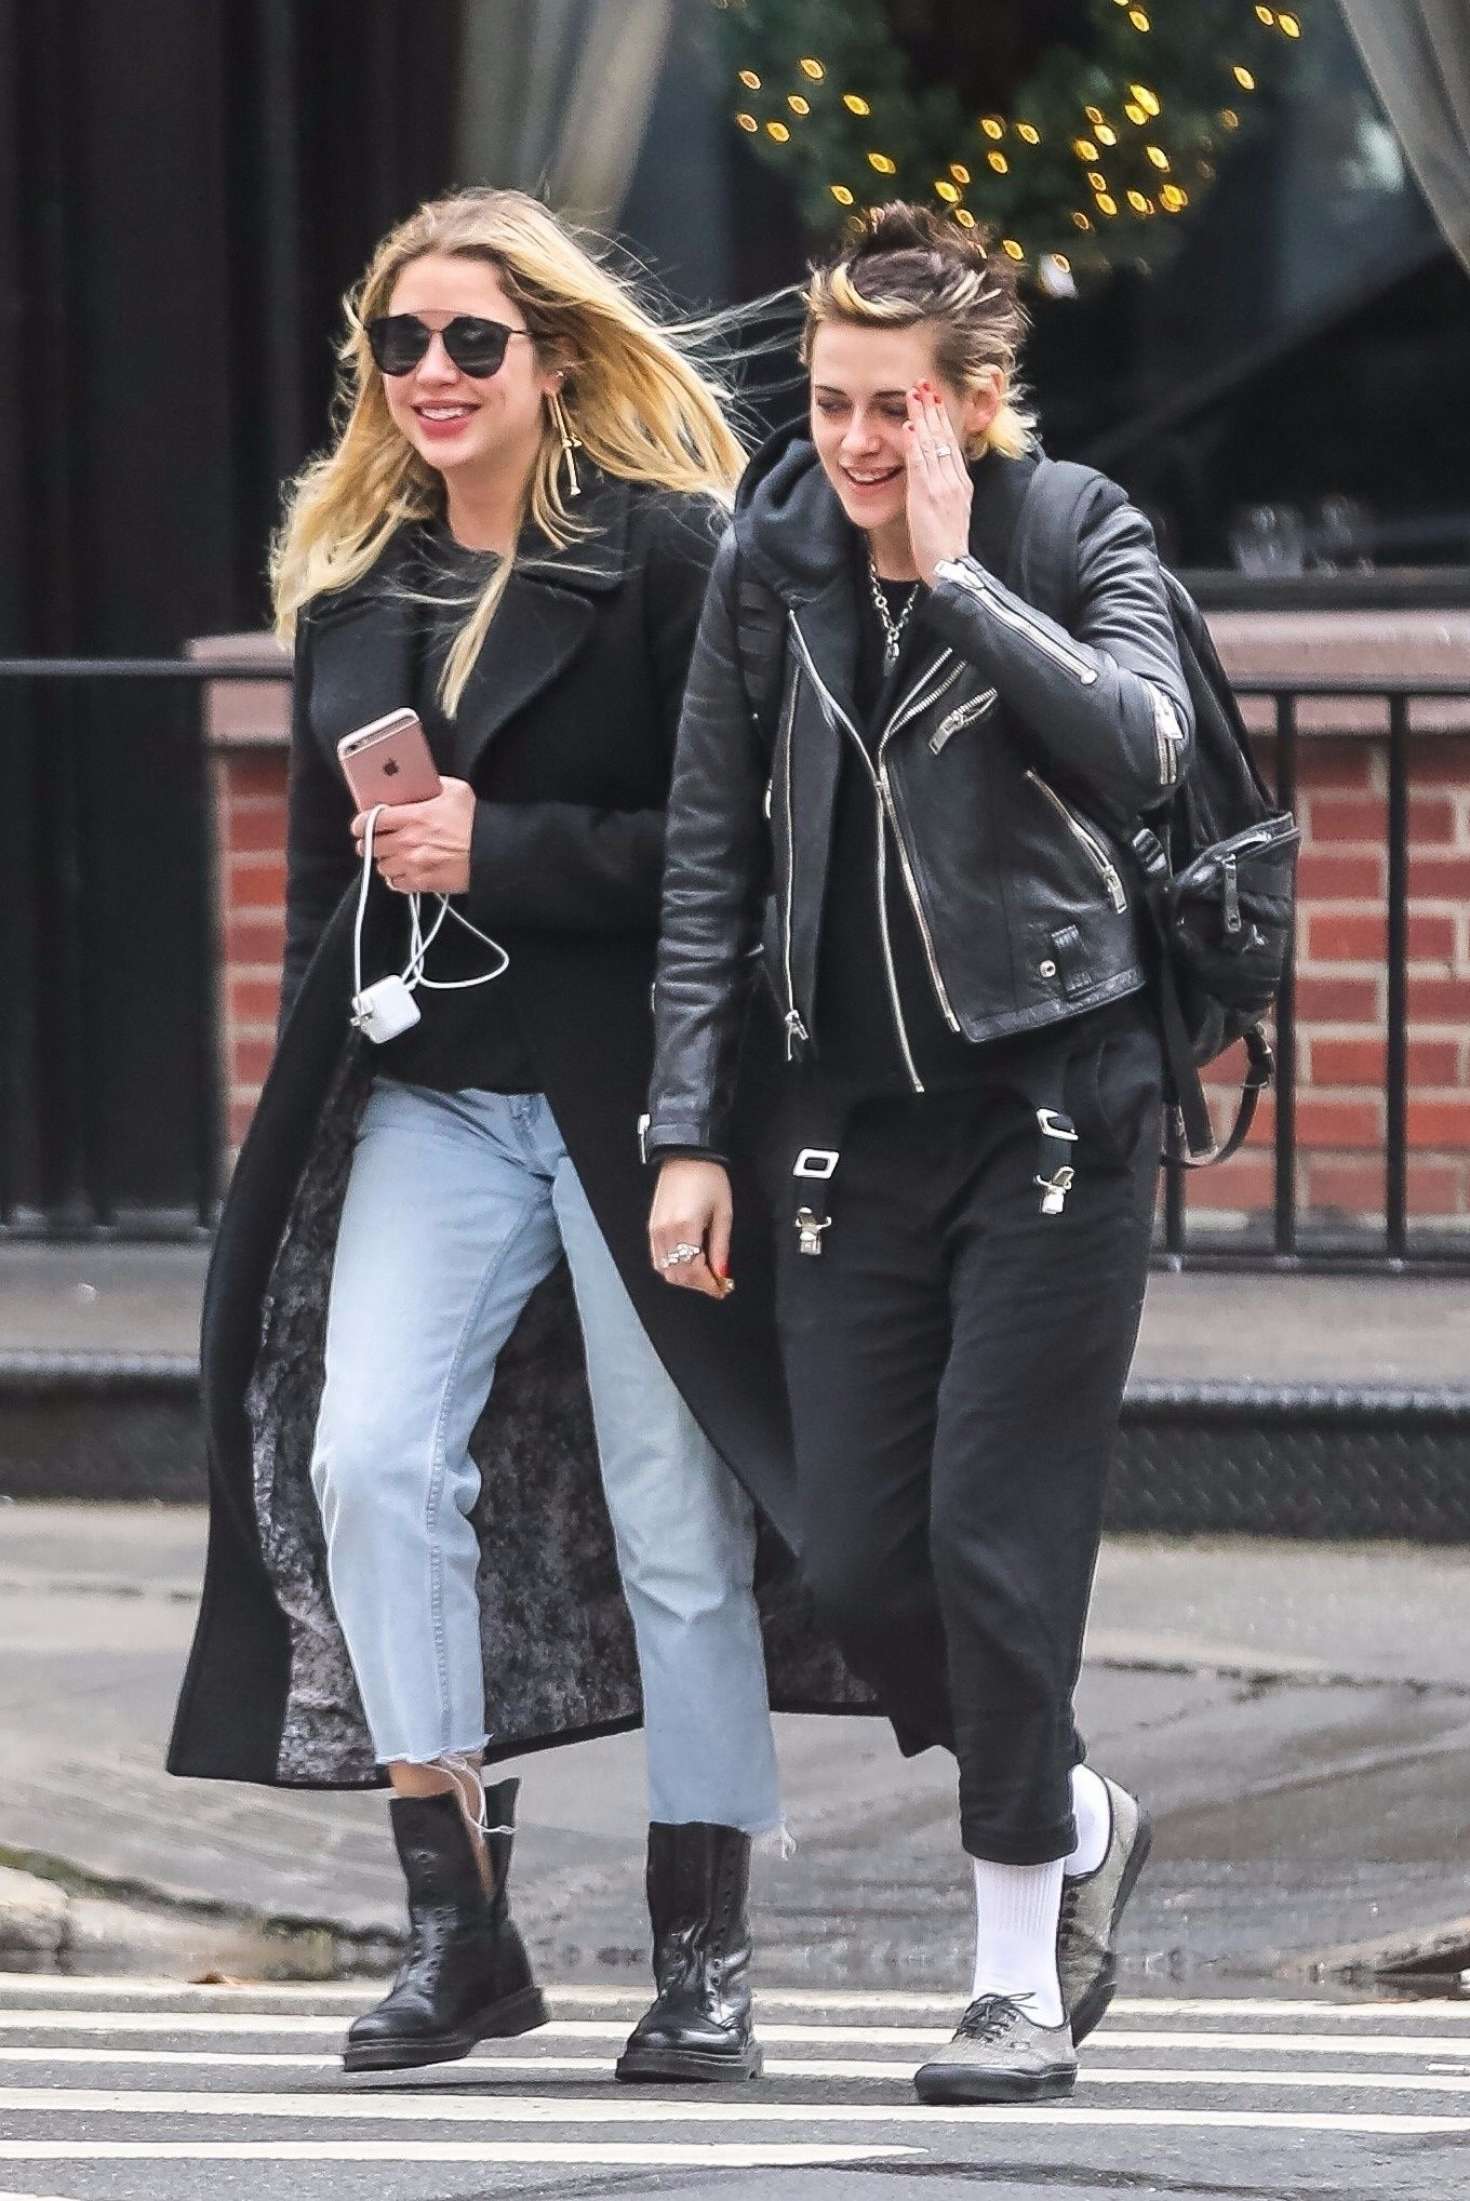 Ashley Benson and Kristen Stewart out together in NYC -03 | GotCeleb